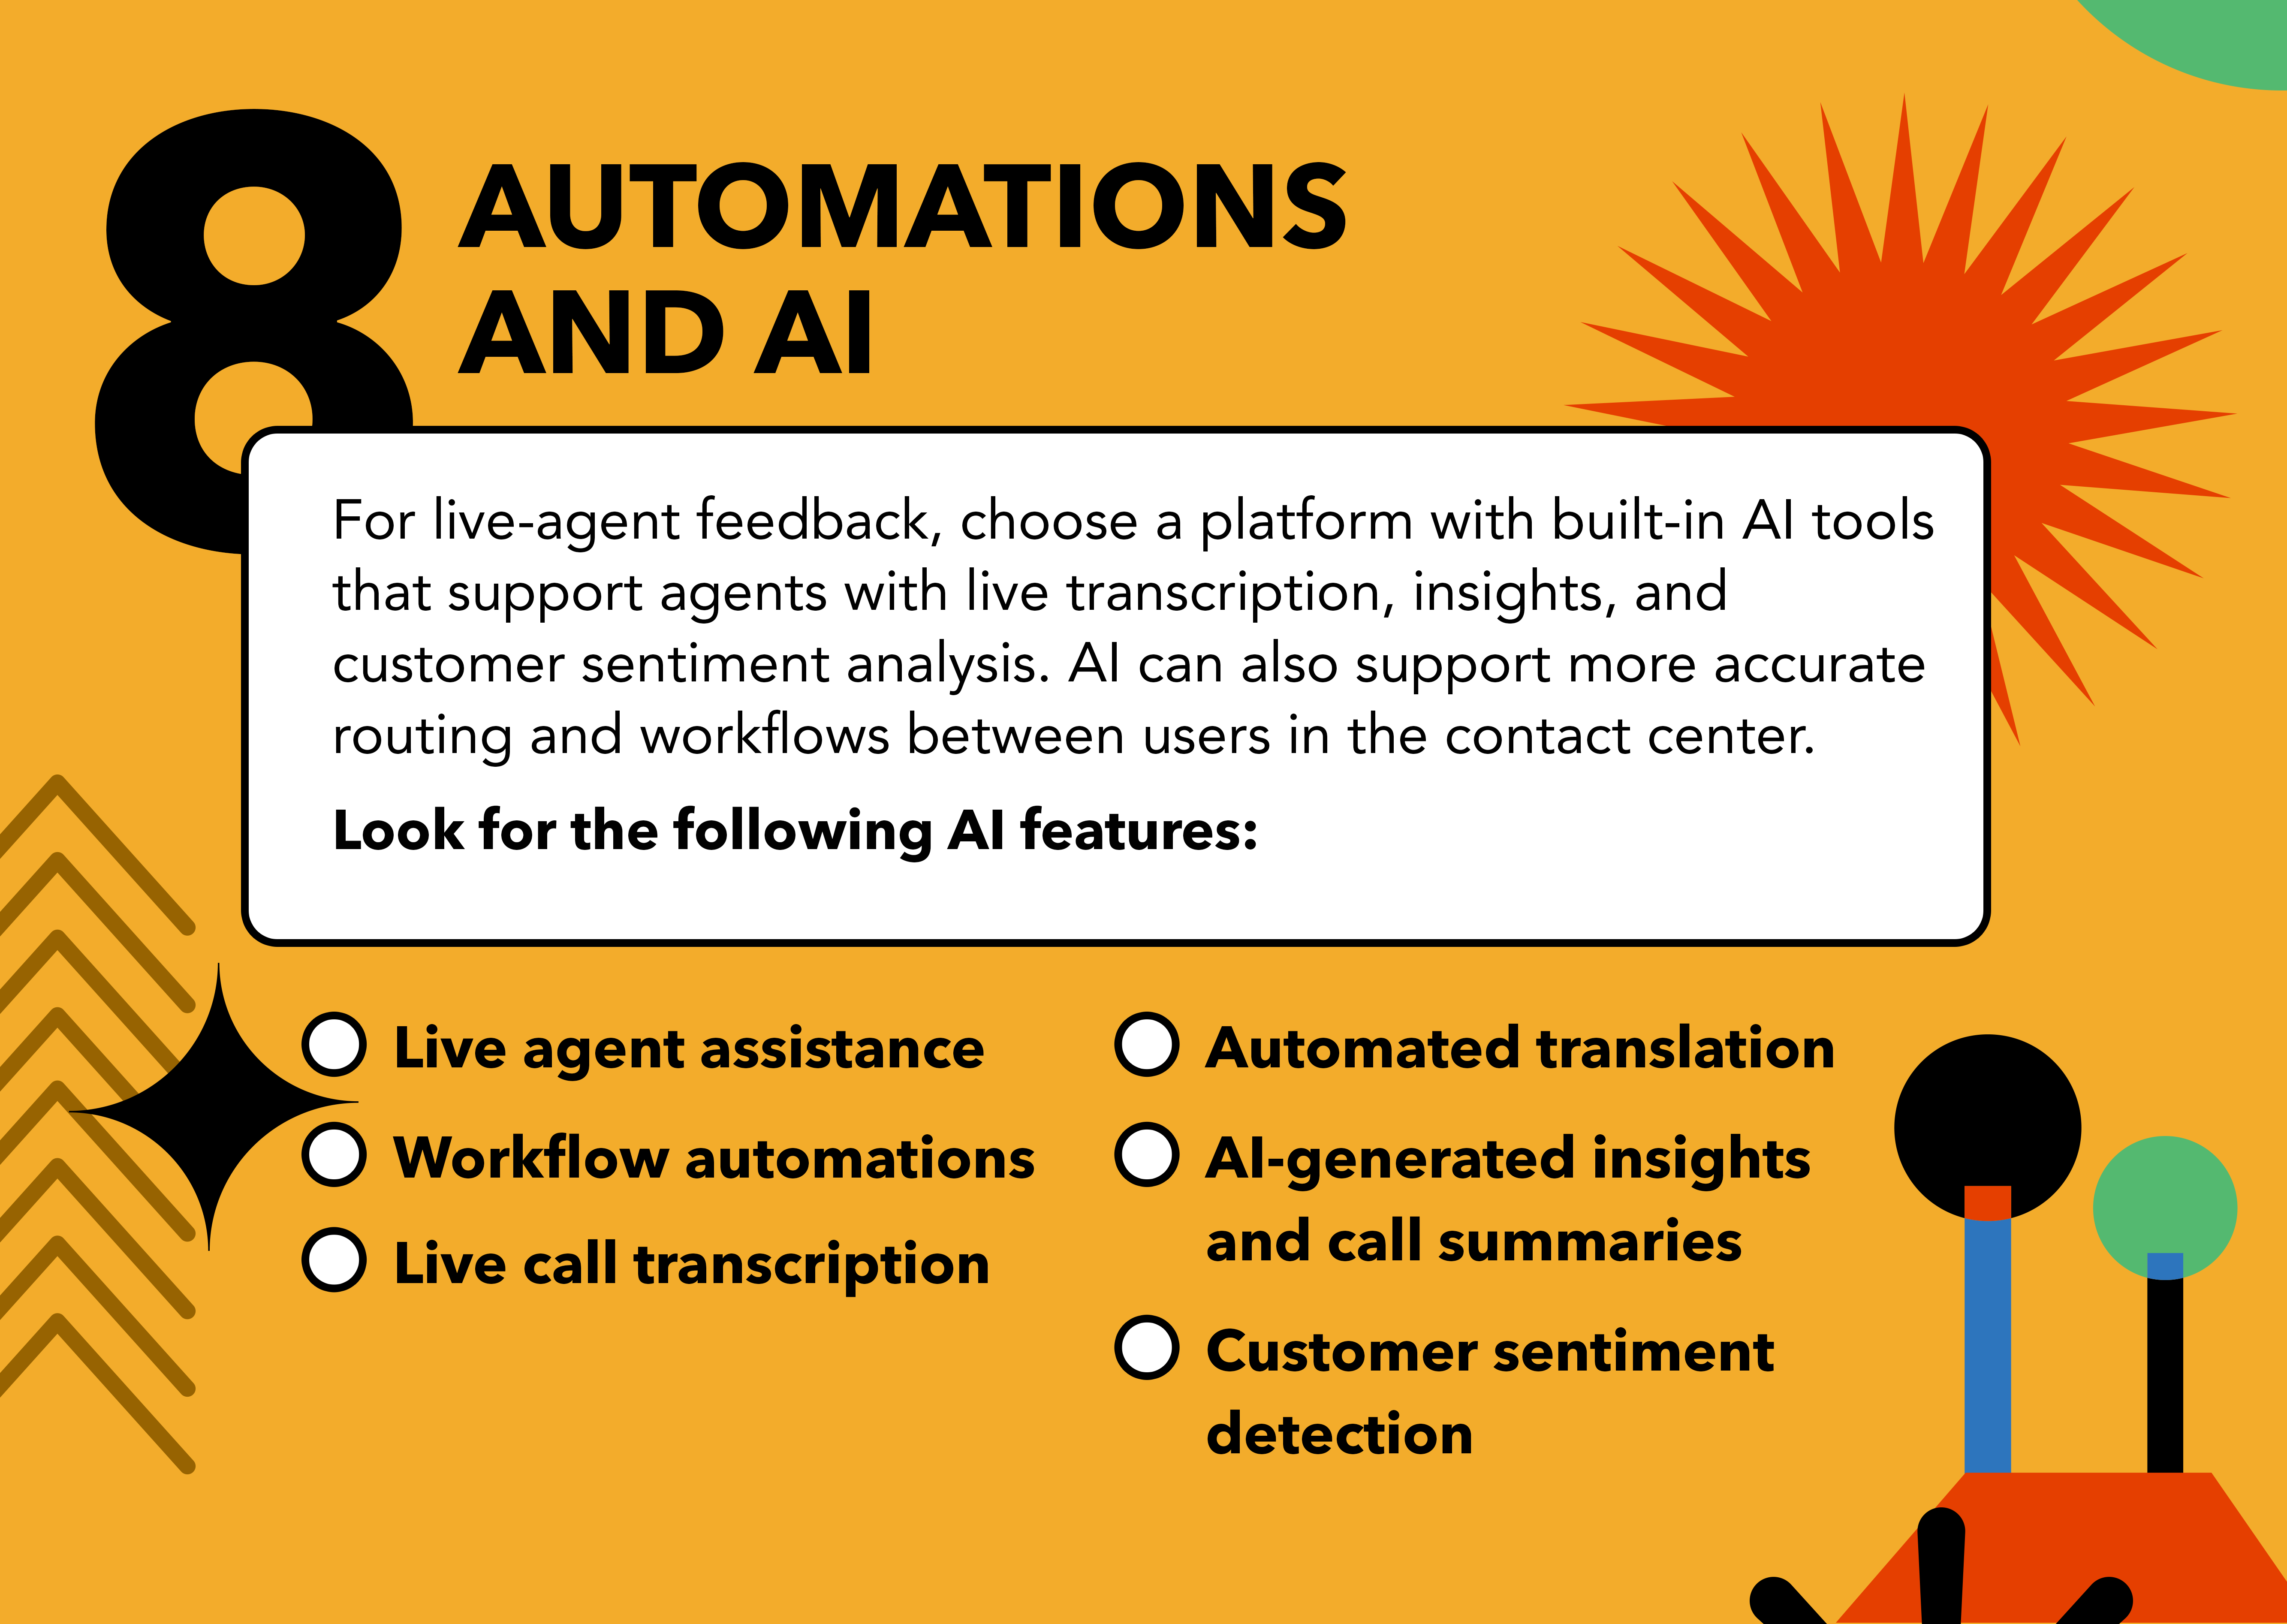 Contact center software requirements checklist - automations and ai